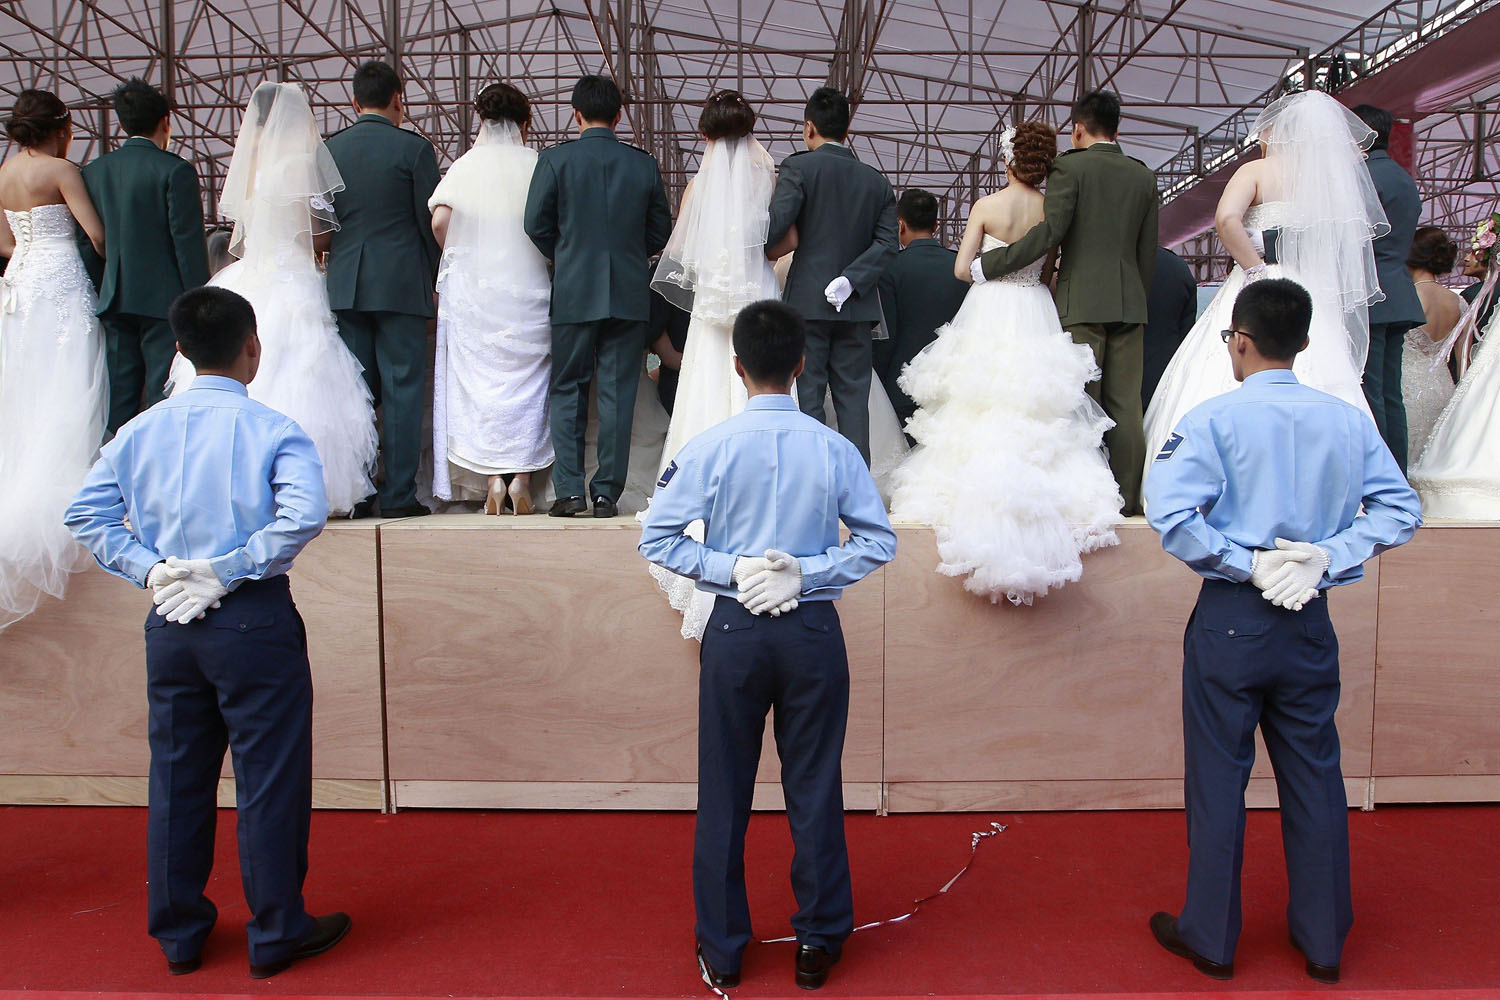 Soldiers guard a platform to prevent it from falling apart while newlyweds have their group photo taken, during a military mass wedding ceremony in Taipei